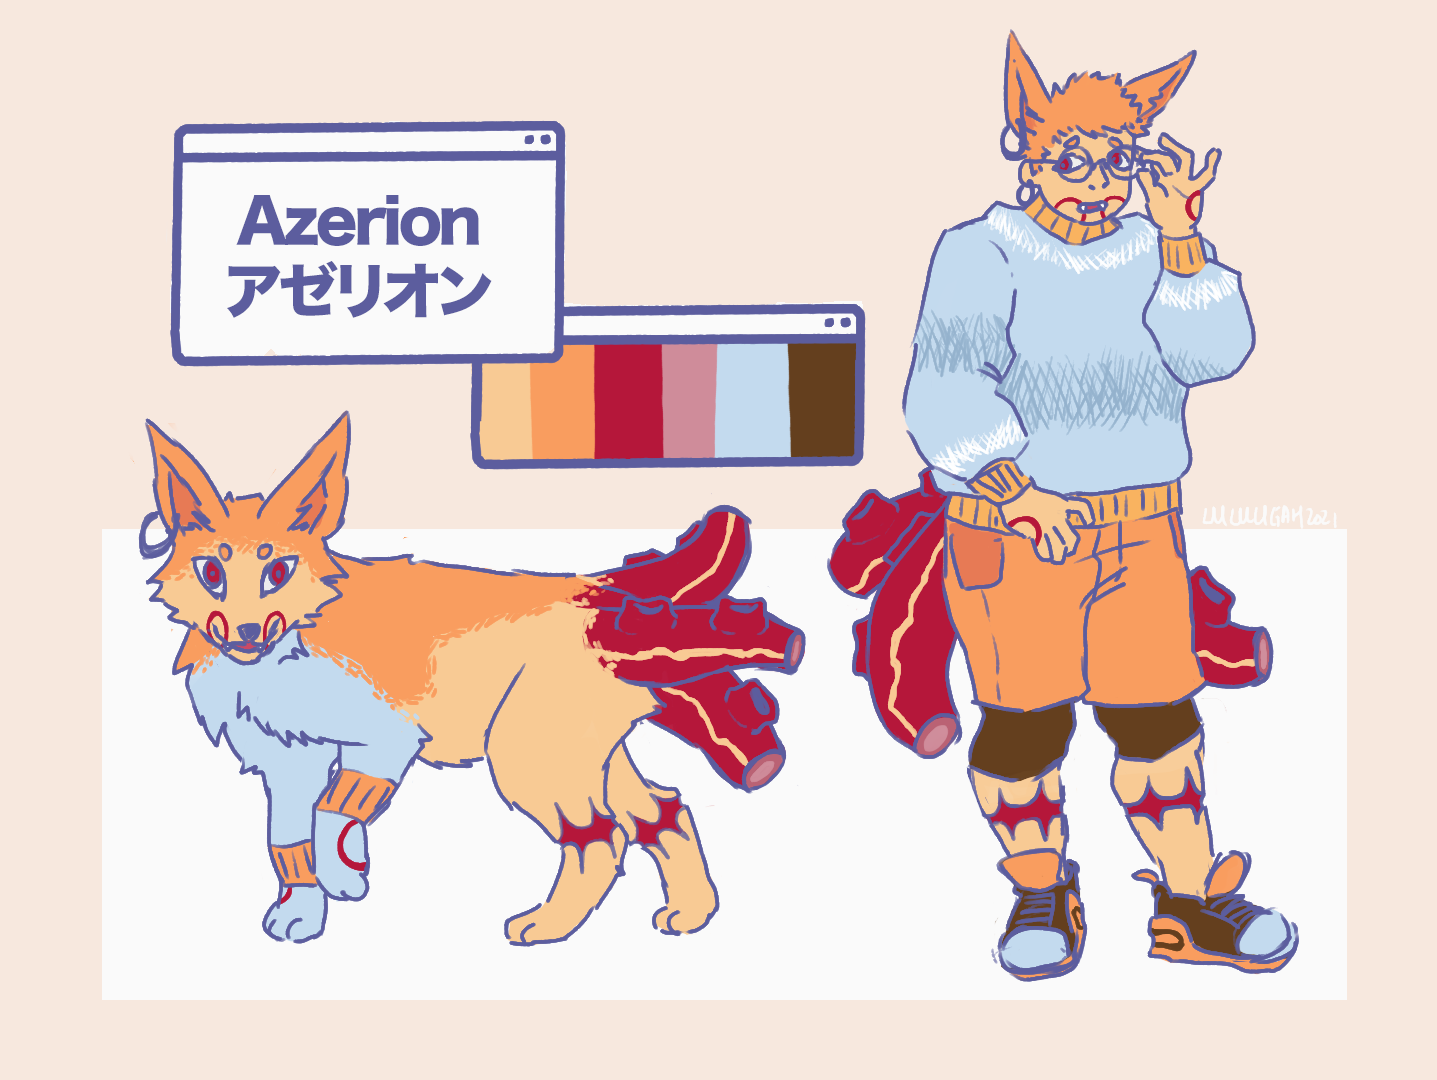 FXMY-218: Azerion